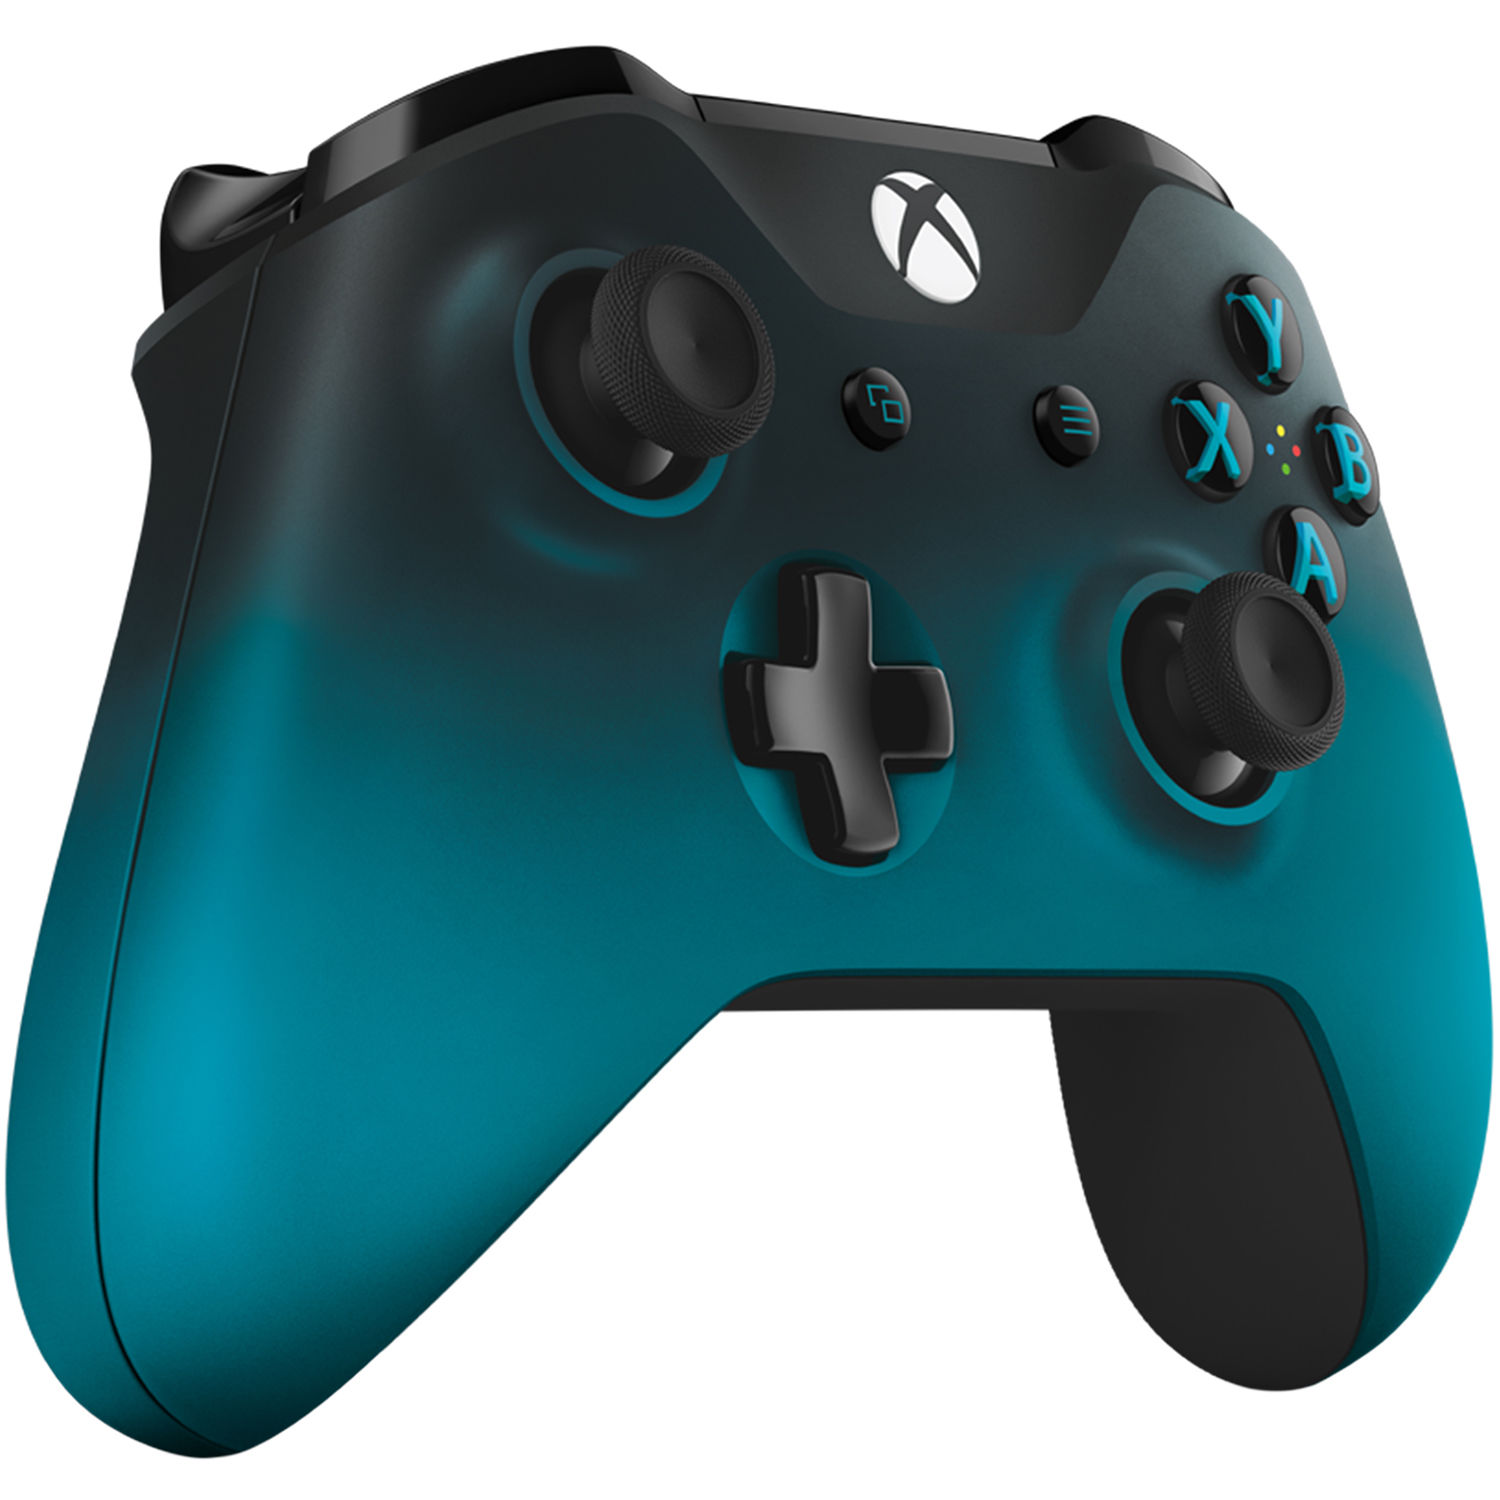 xbox one windows 10 controller driver download